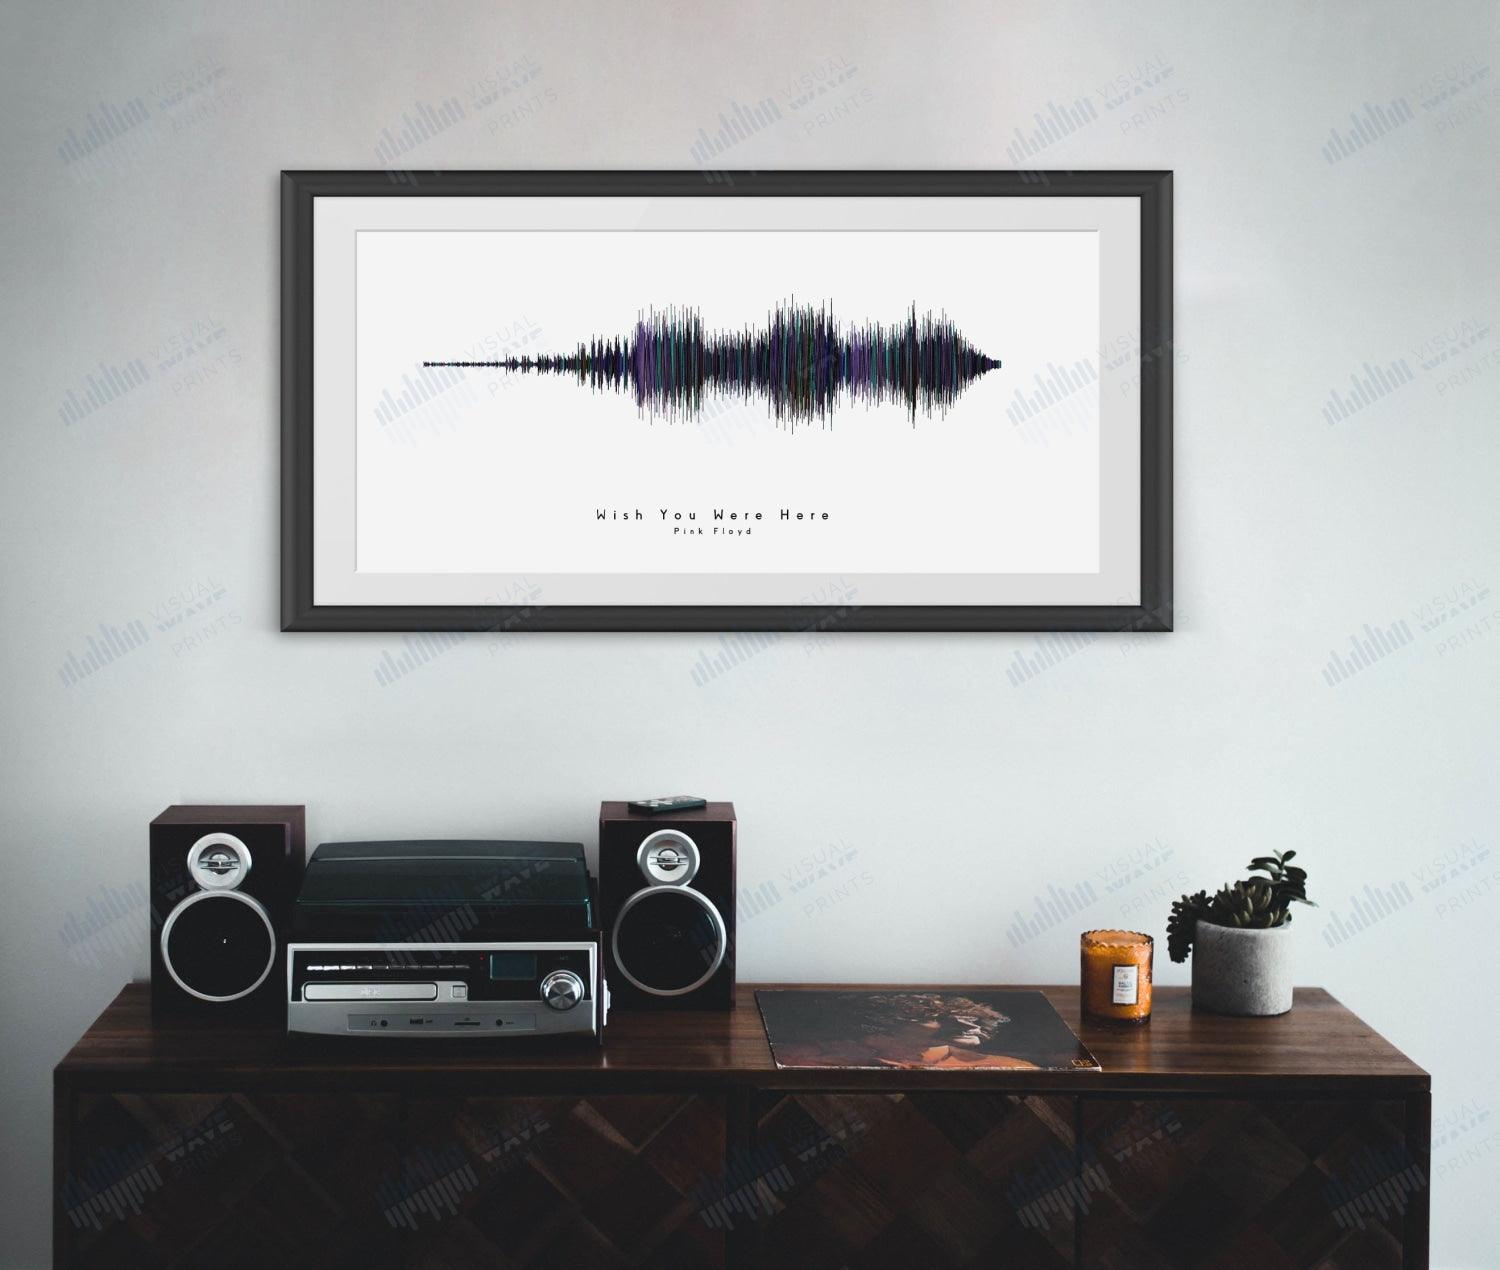 Wish You Were Here by Pink Floyd - Visual Wave Prints